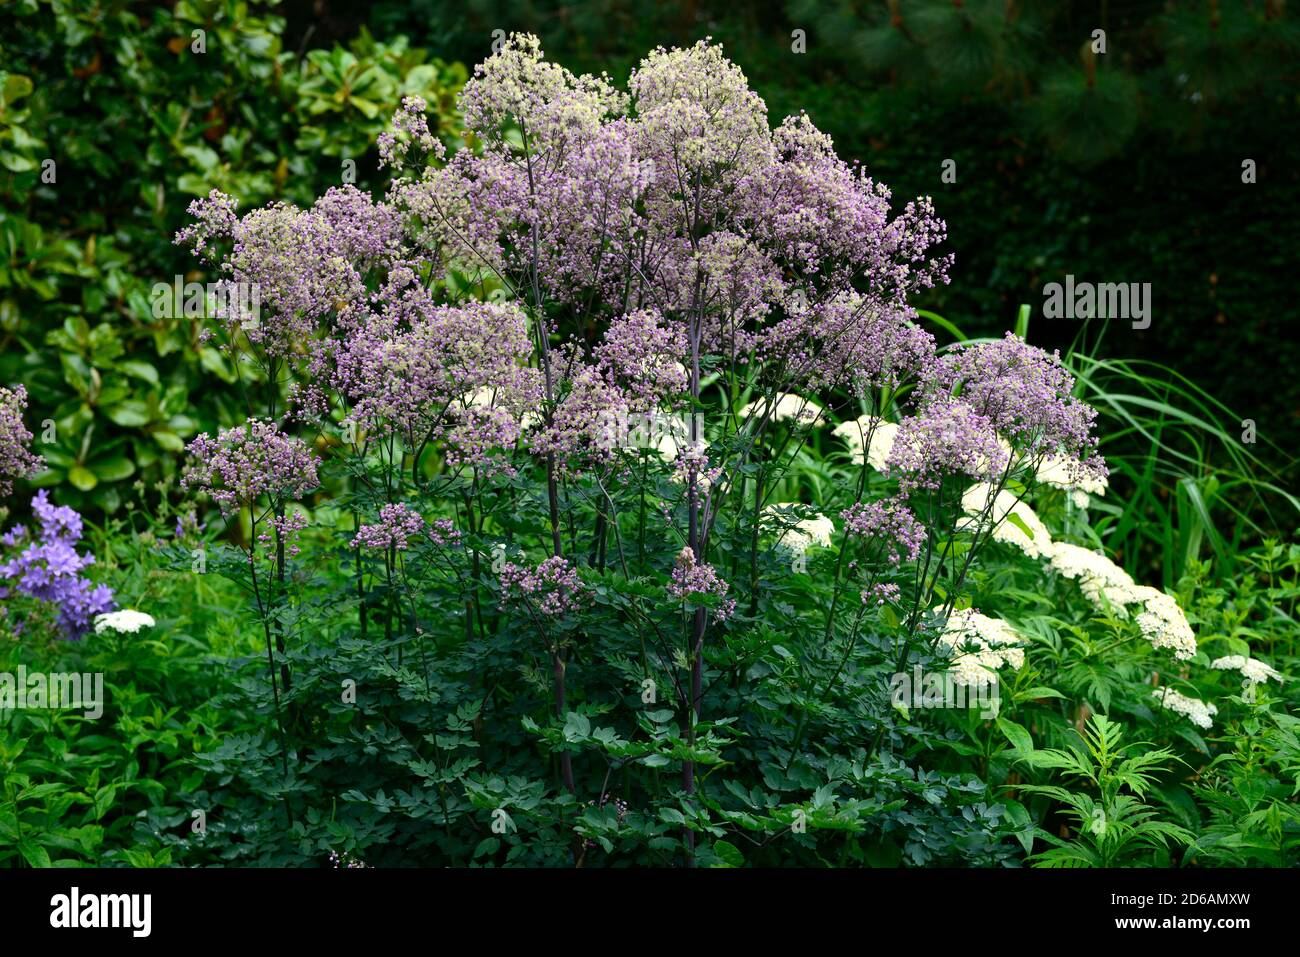 thalictrum elin,tall meadow rue,lacy blue-green foliage,purple,lilac flowers,flowering,RM floral Stock Photo